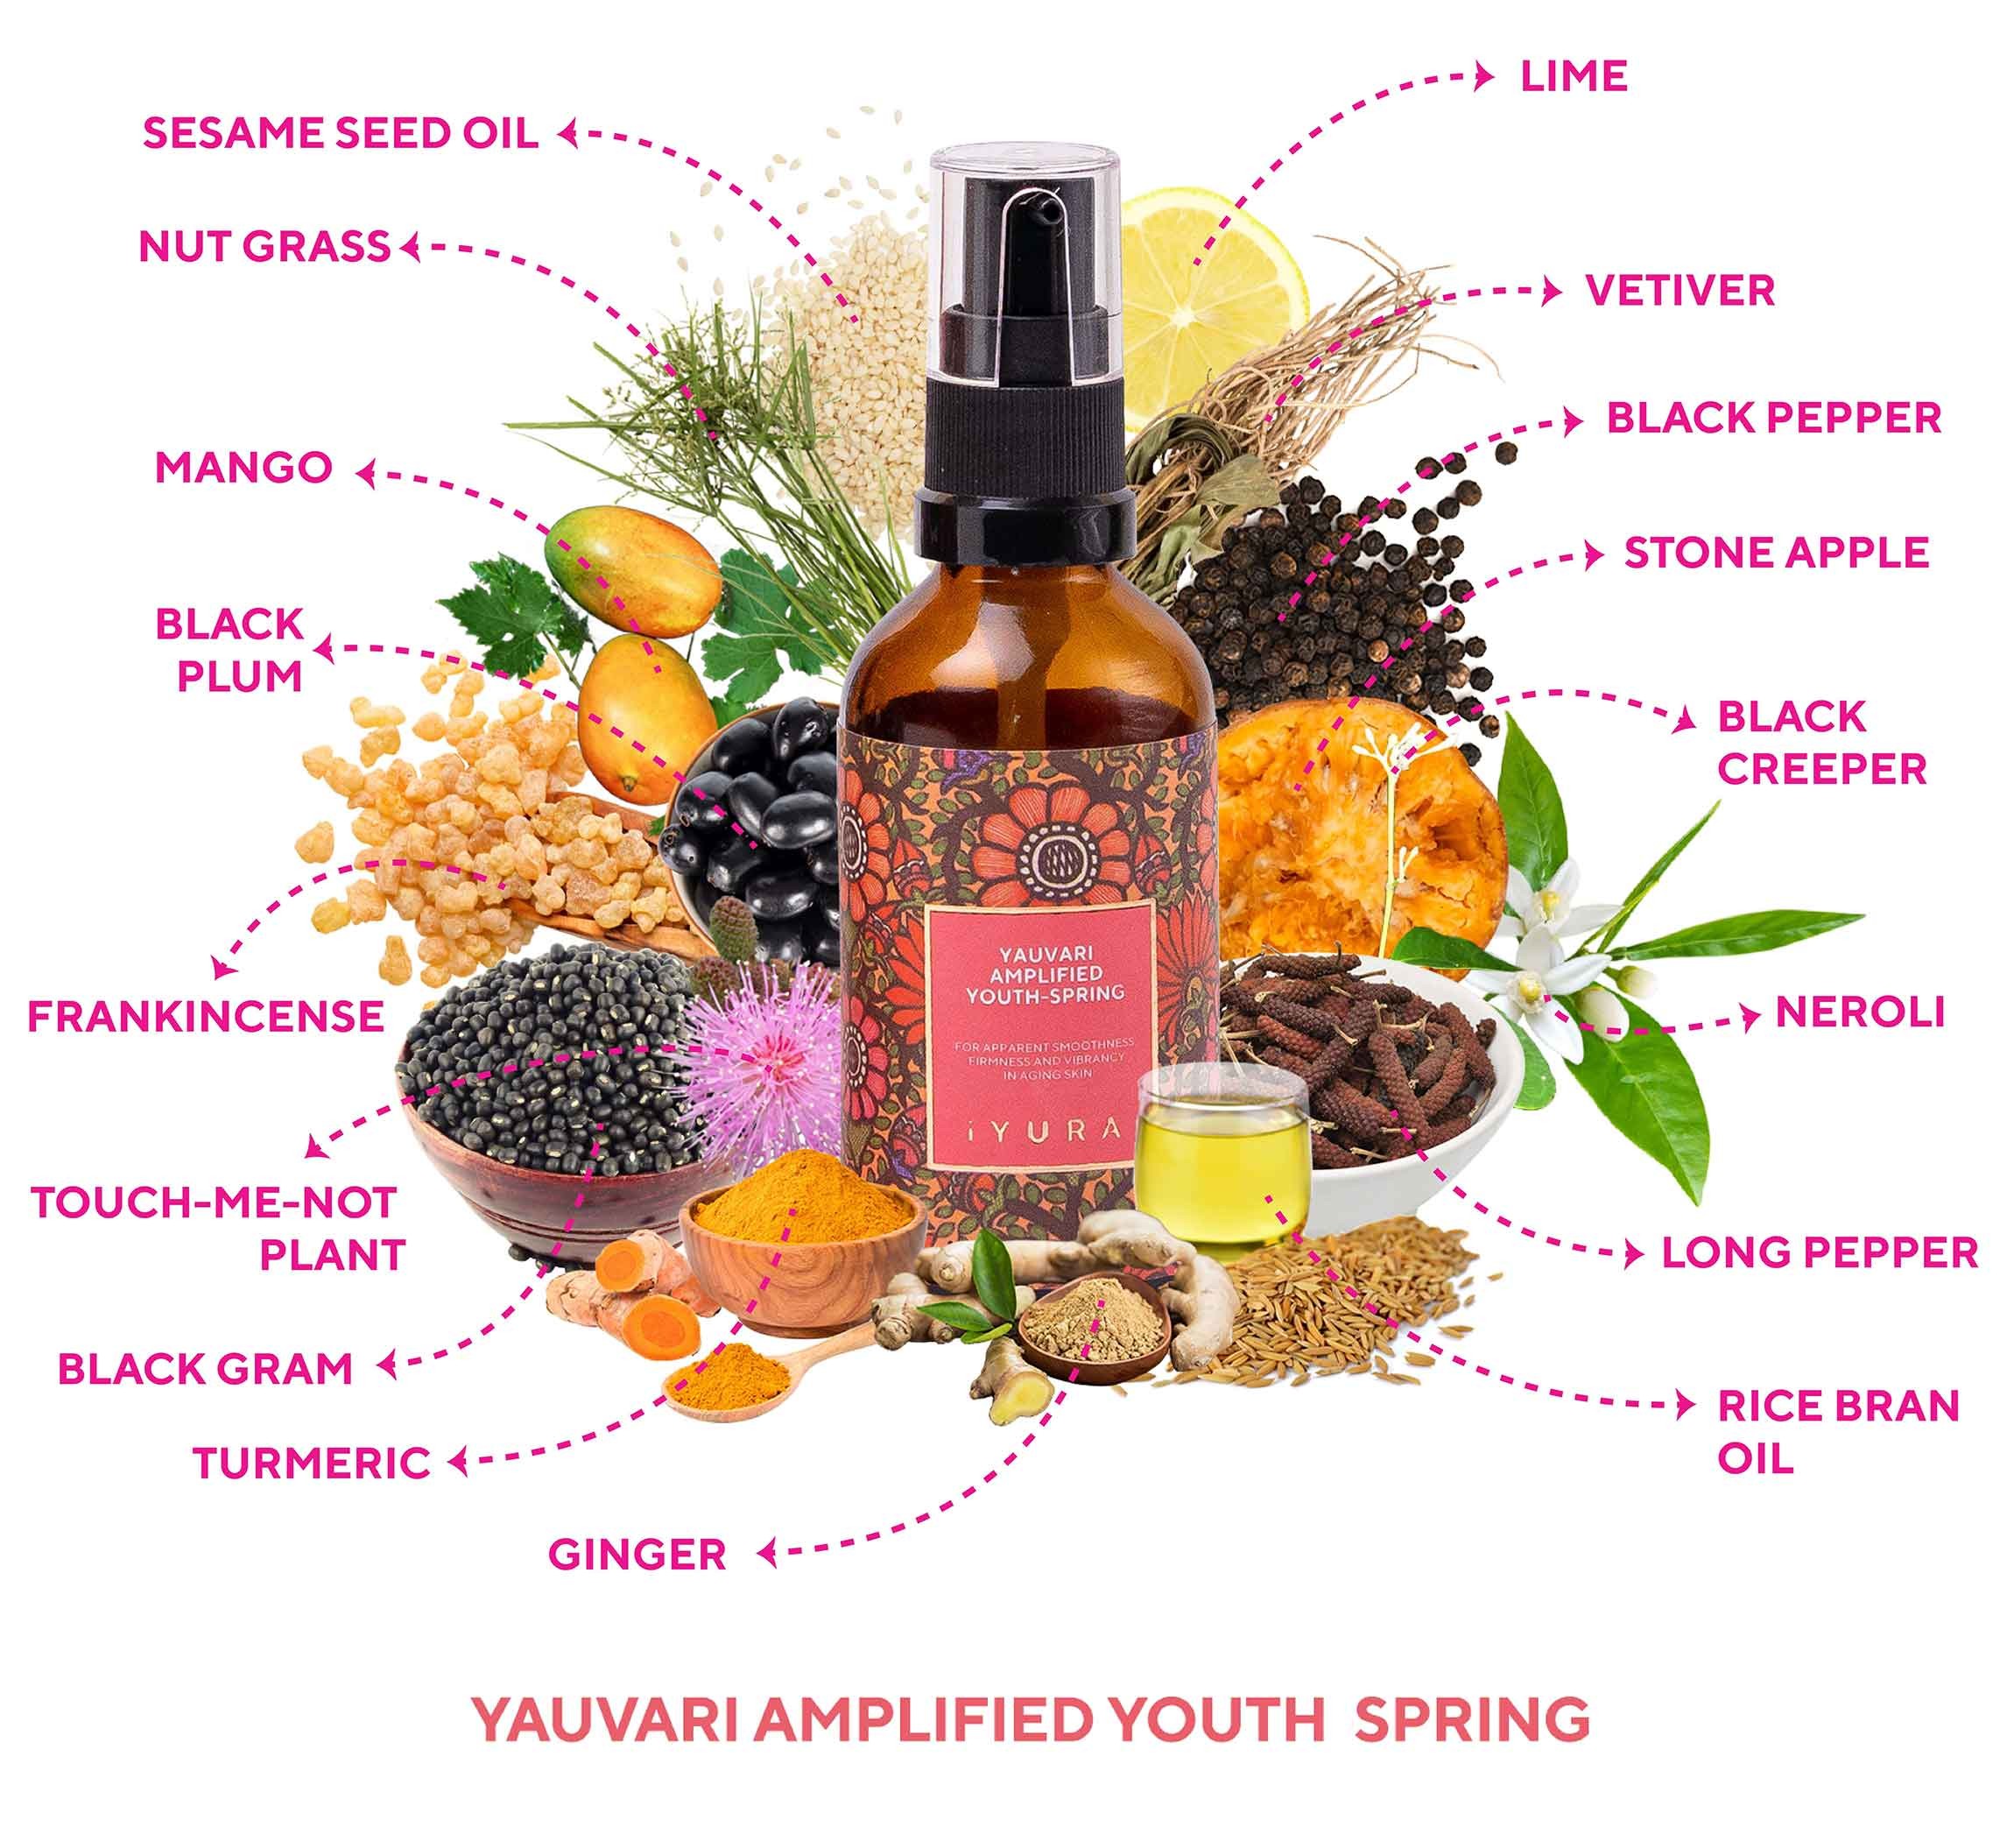 List of ingredients in yauvari amplified youth spring depicted with their photos